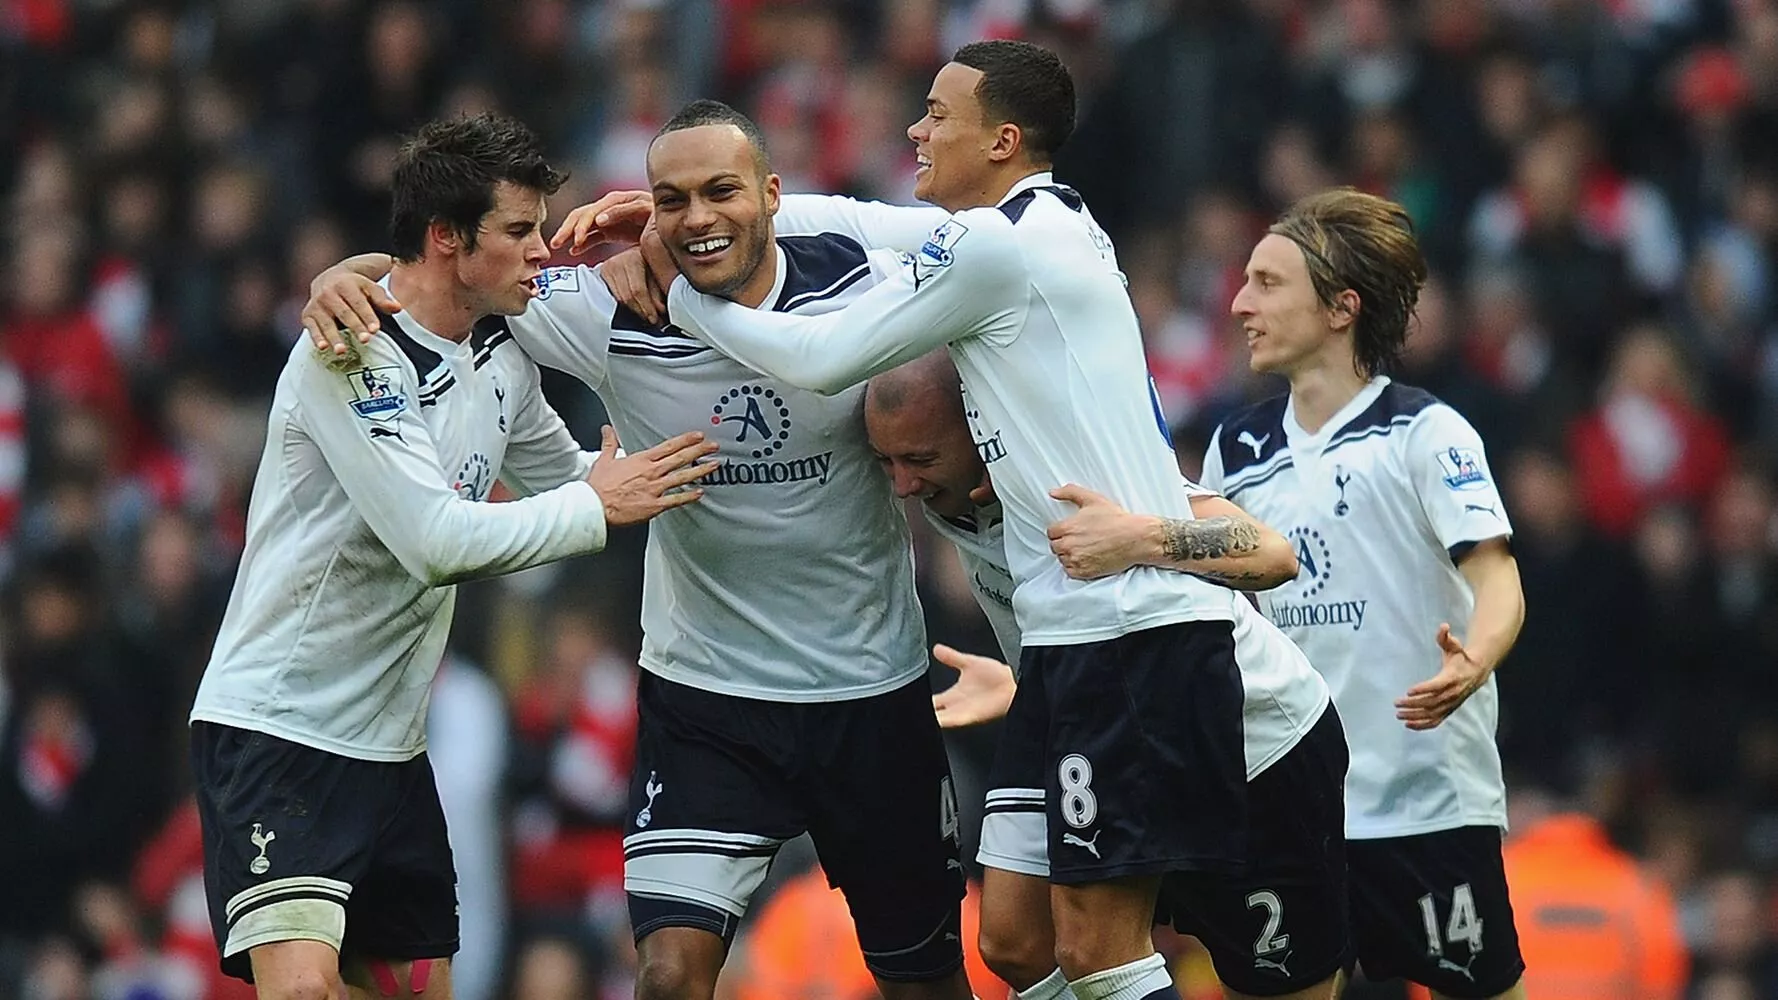 Top five best North London derby matches of all time